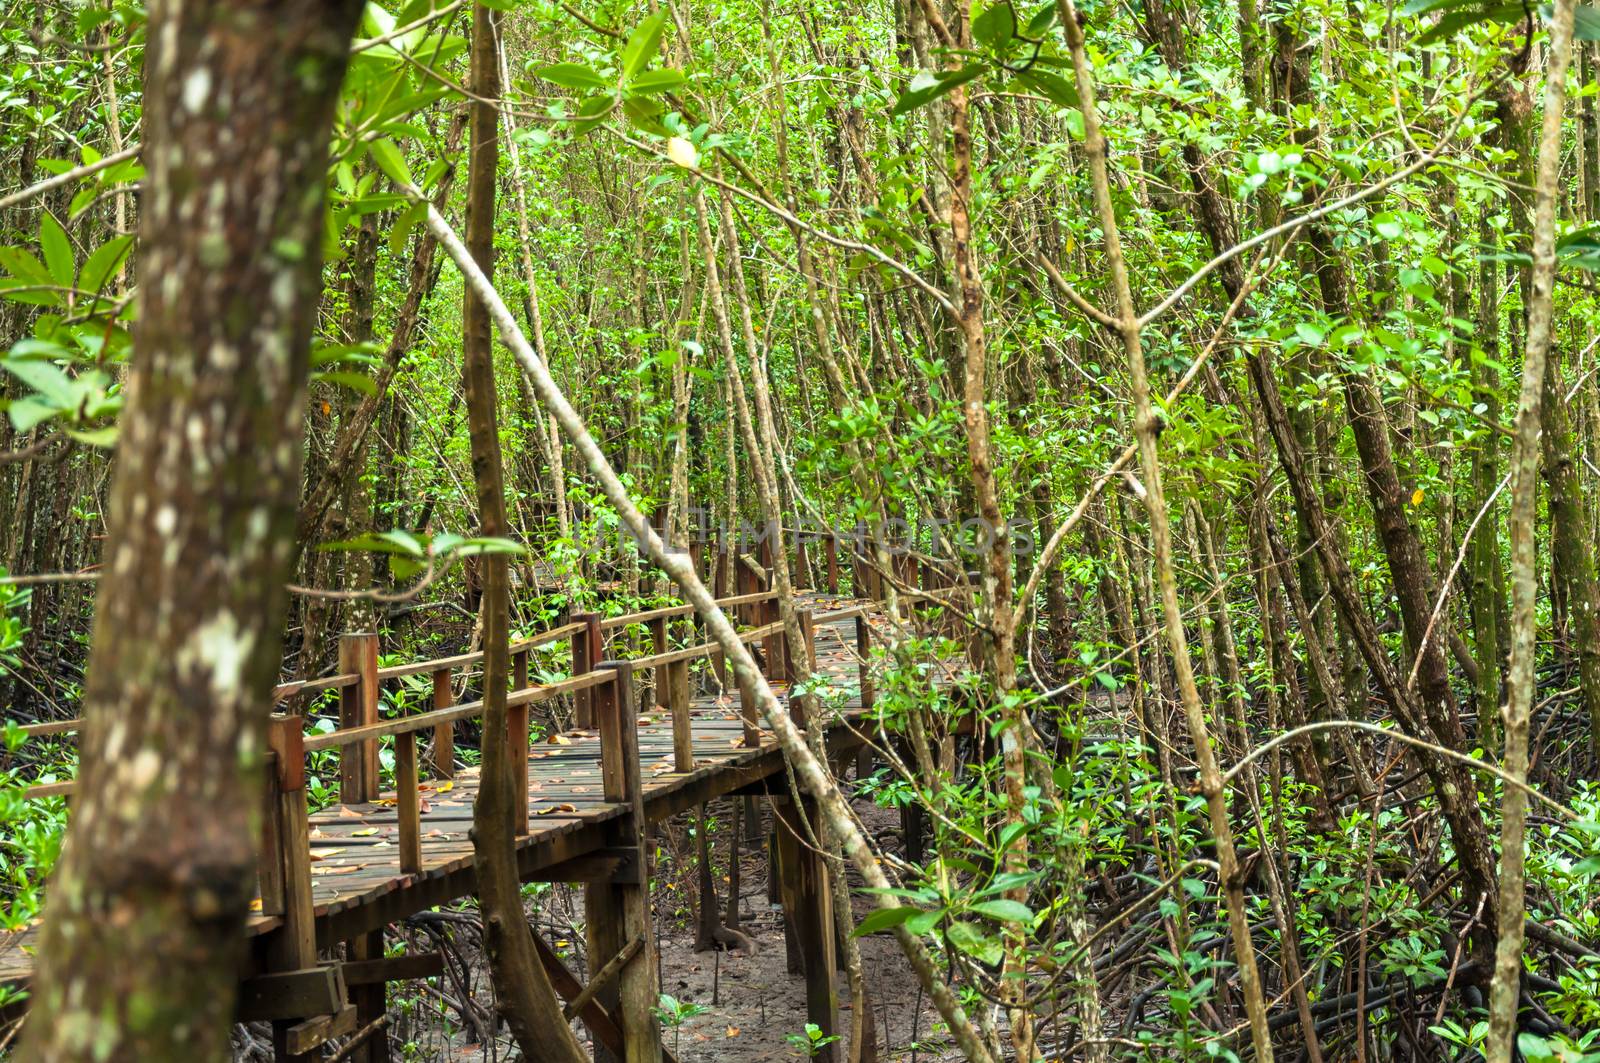 Landscape of Wood corridor at mangrove forest among the trees background